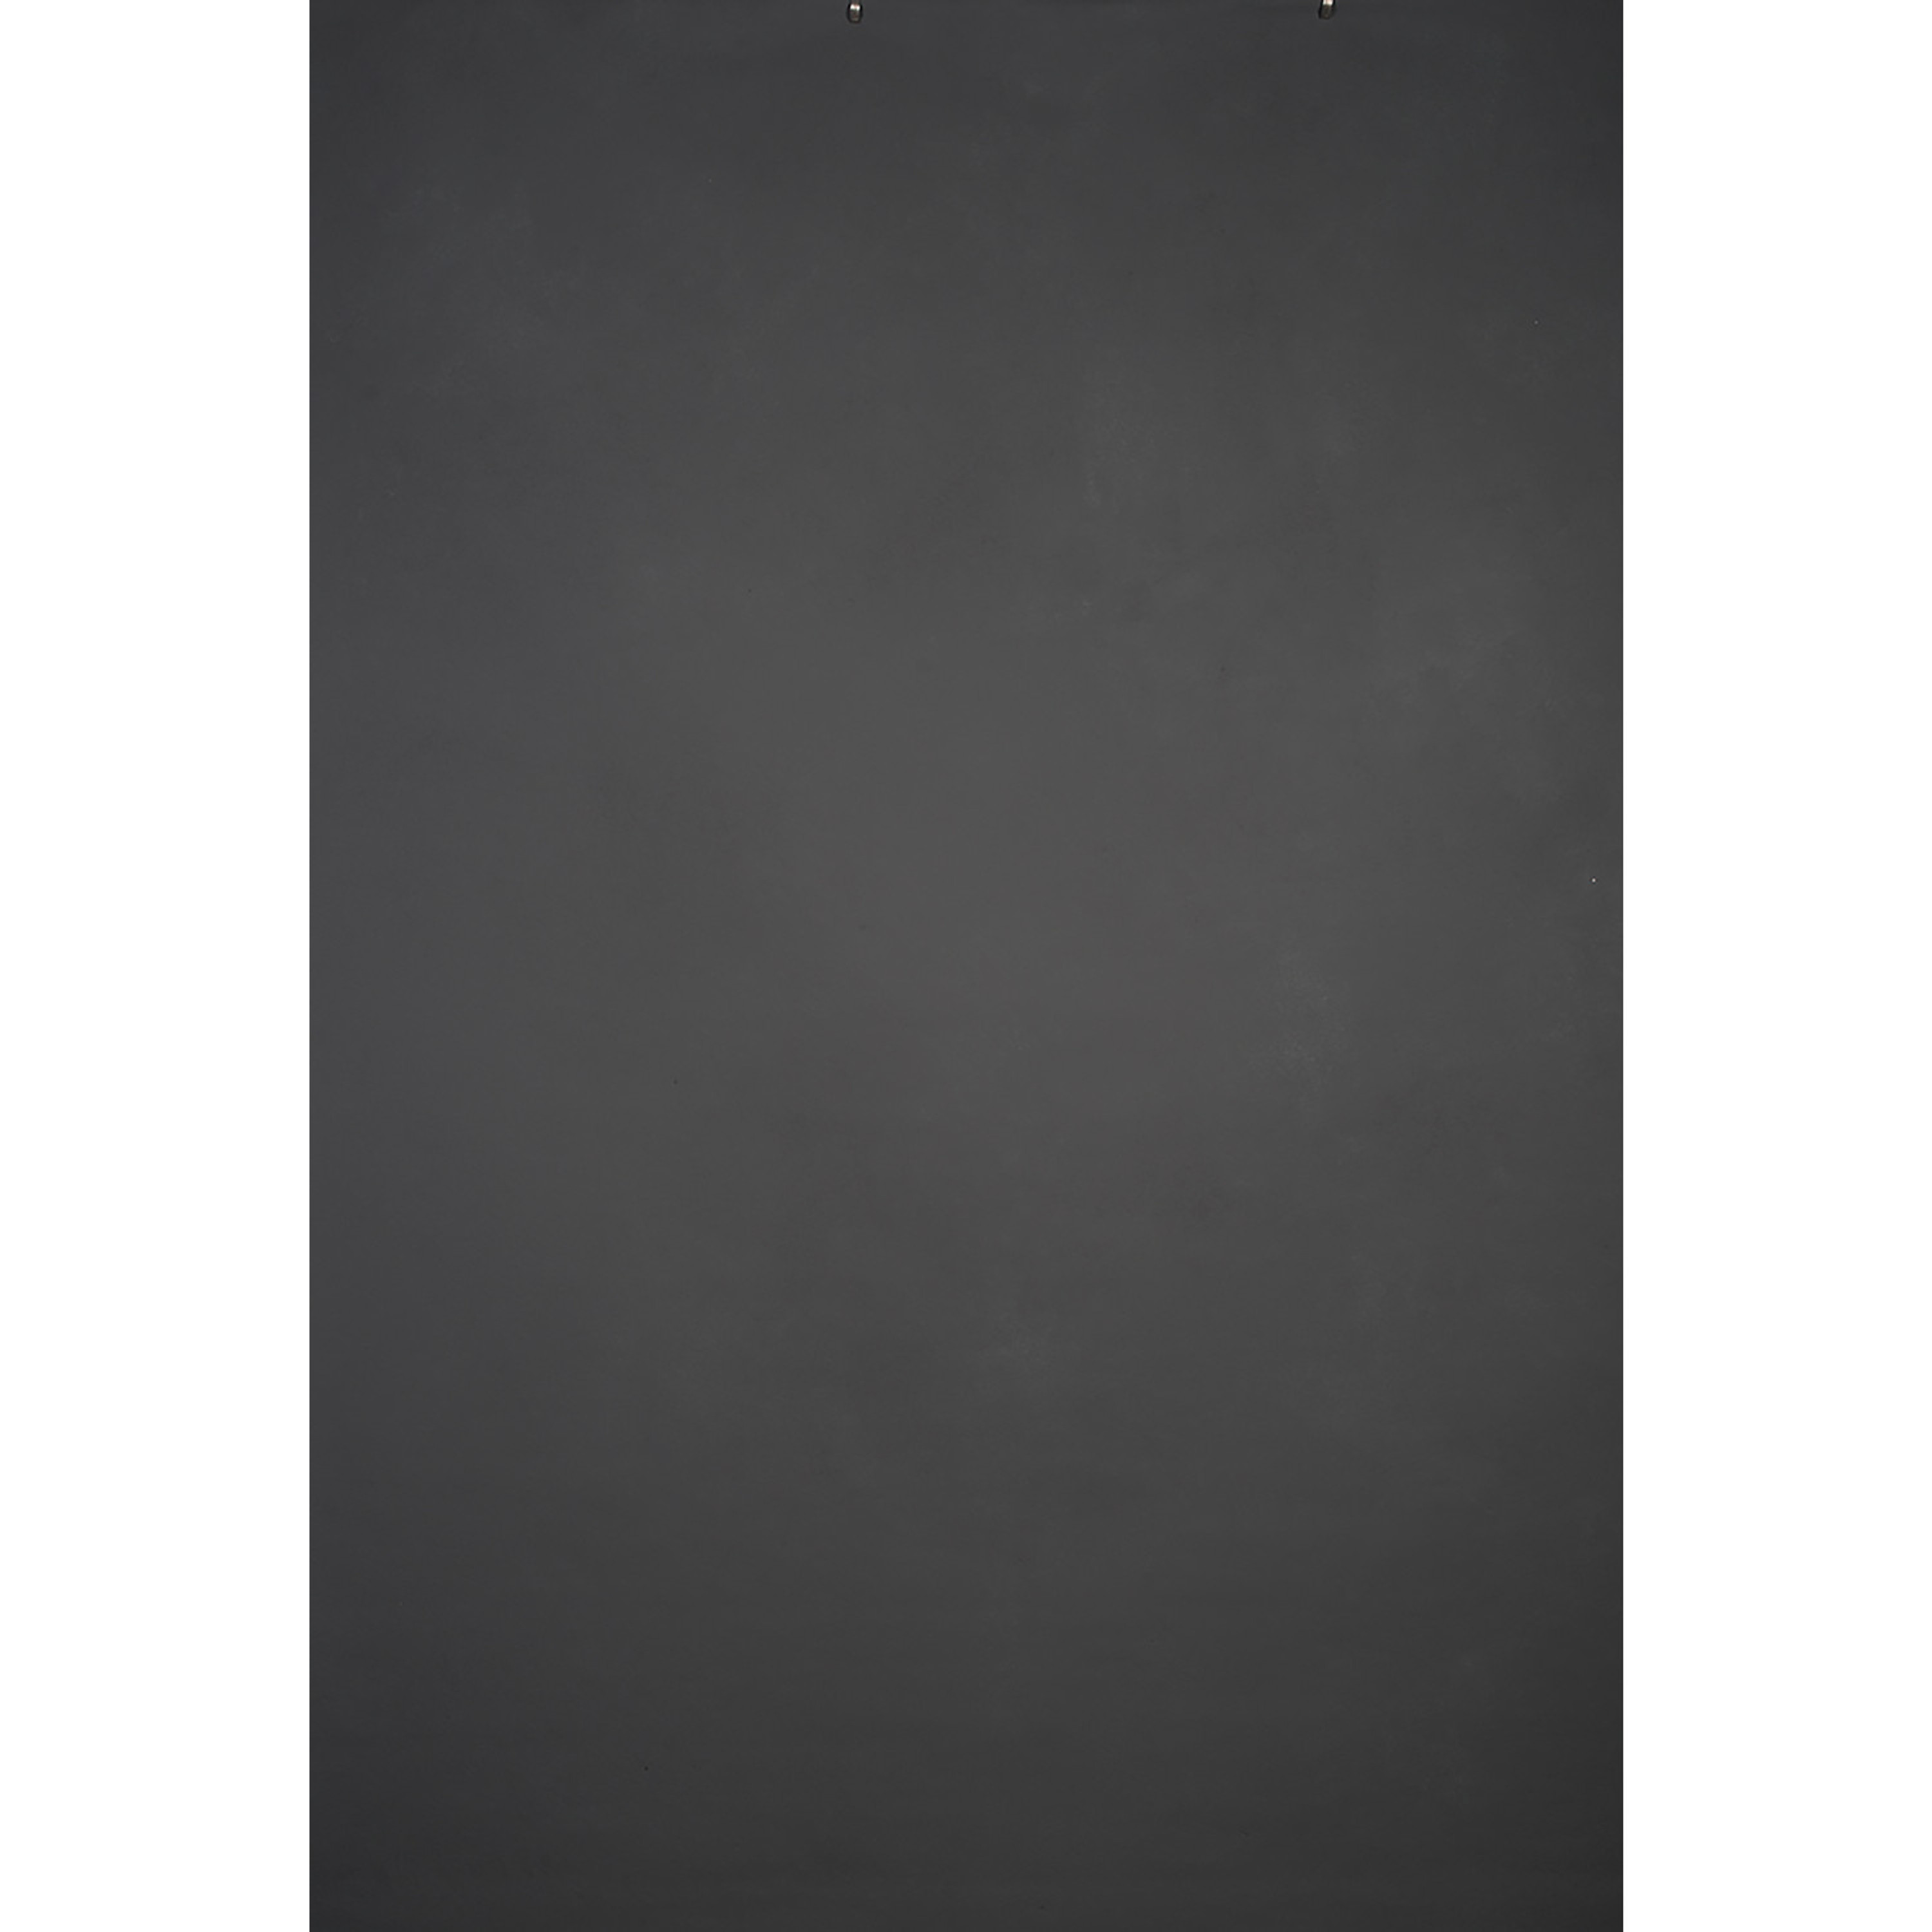 Gravity Backdrops Mid Gray Low Texture LG (SN: 10658)